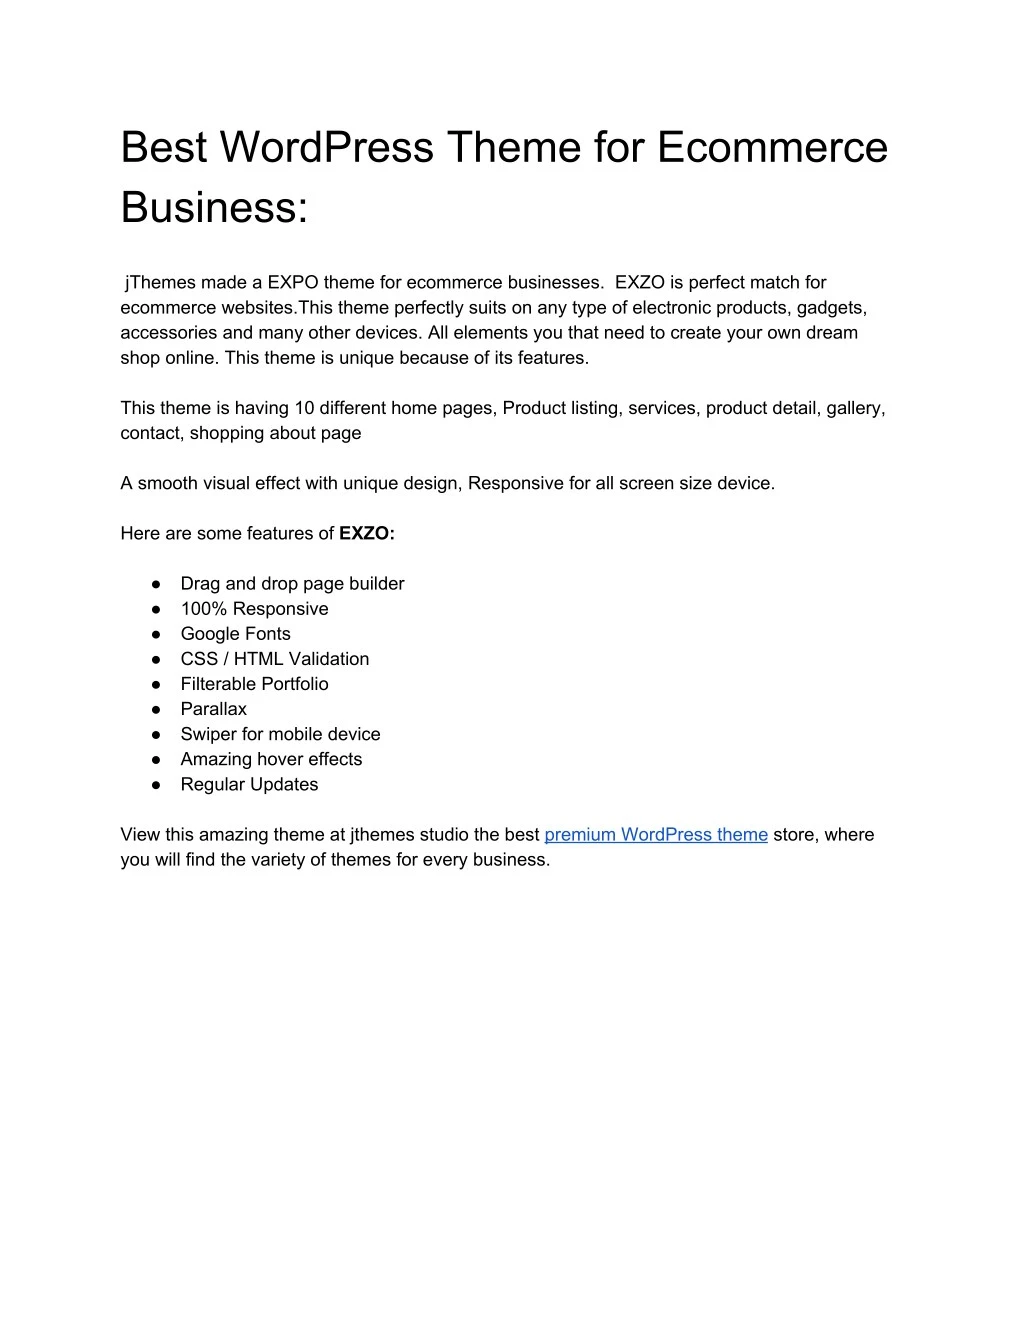 best wordpress theme for ecommerce business